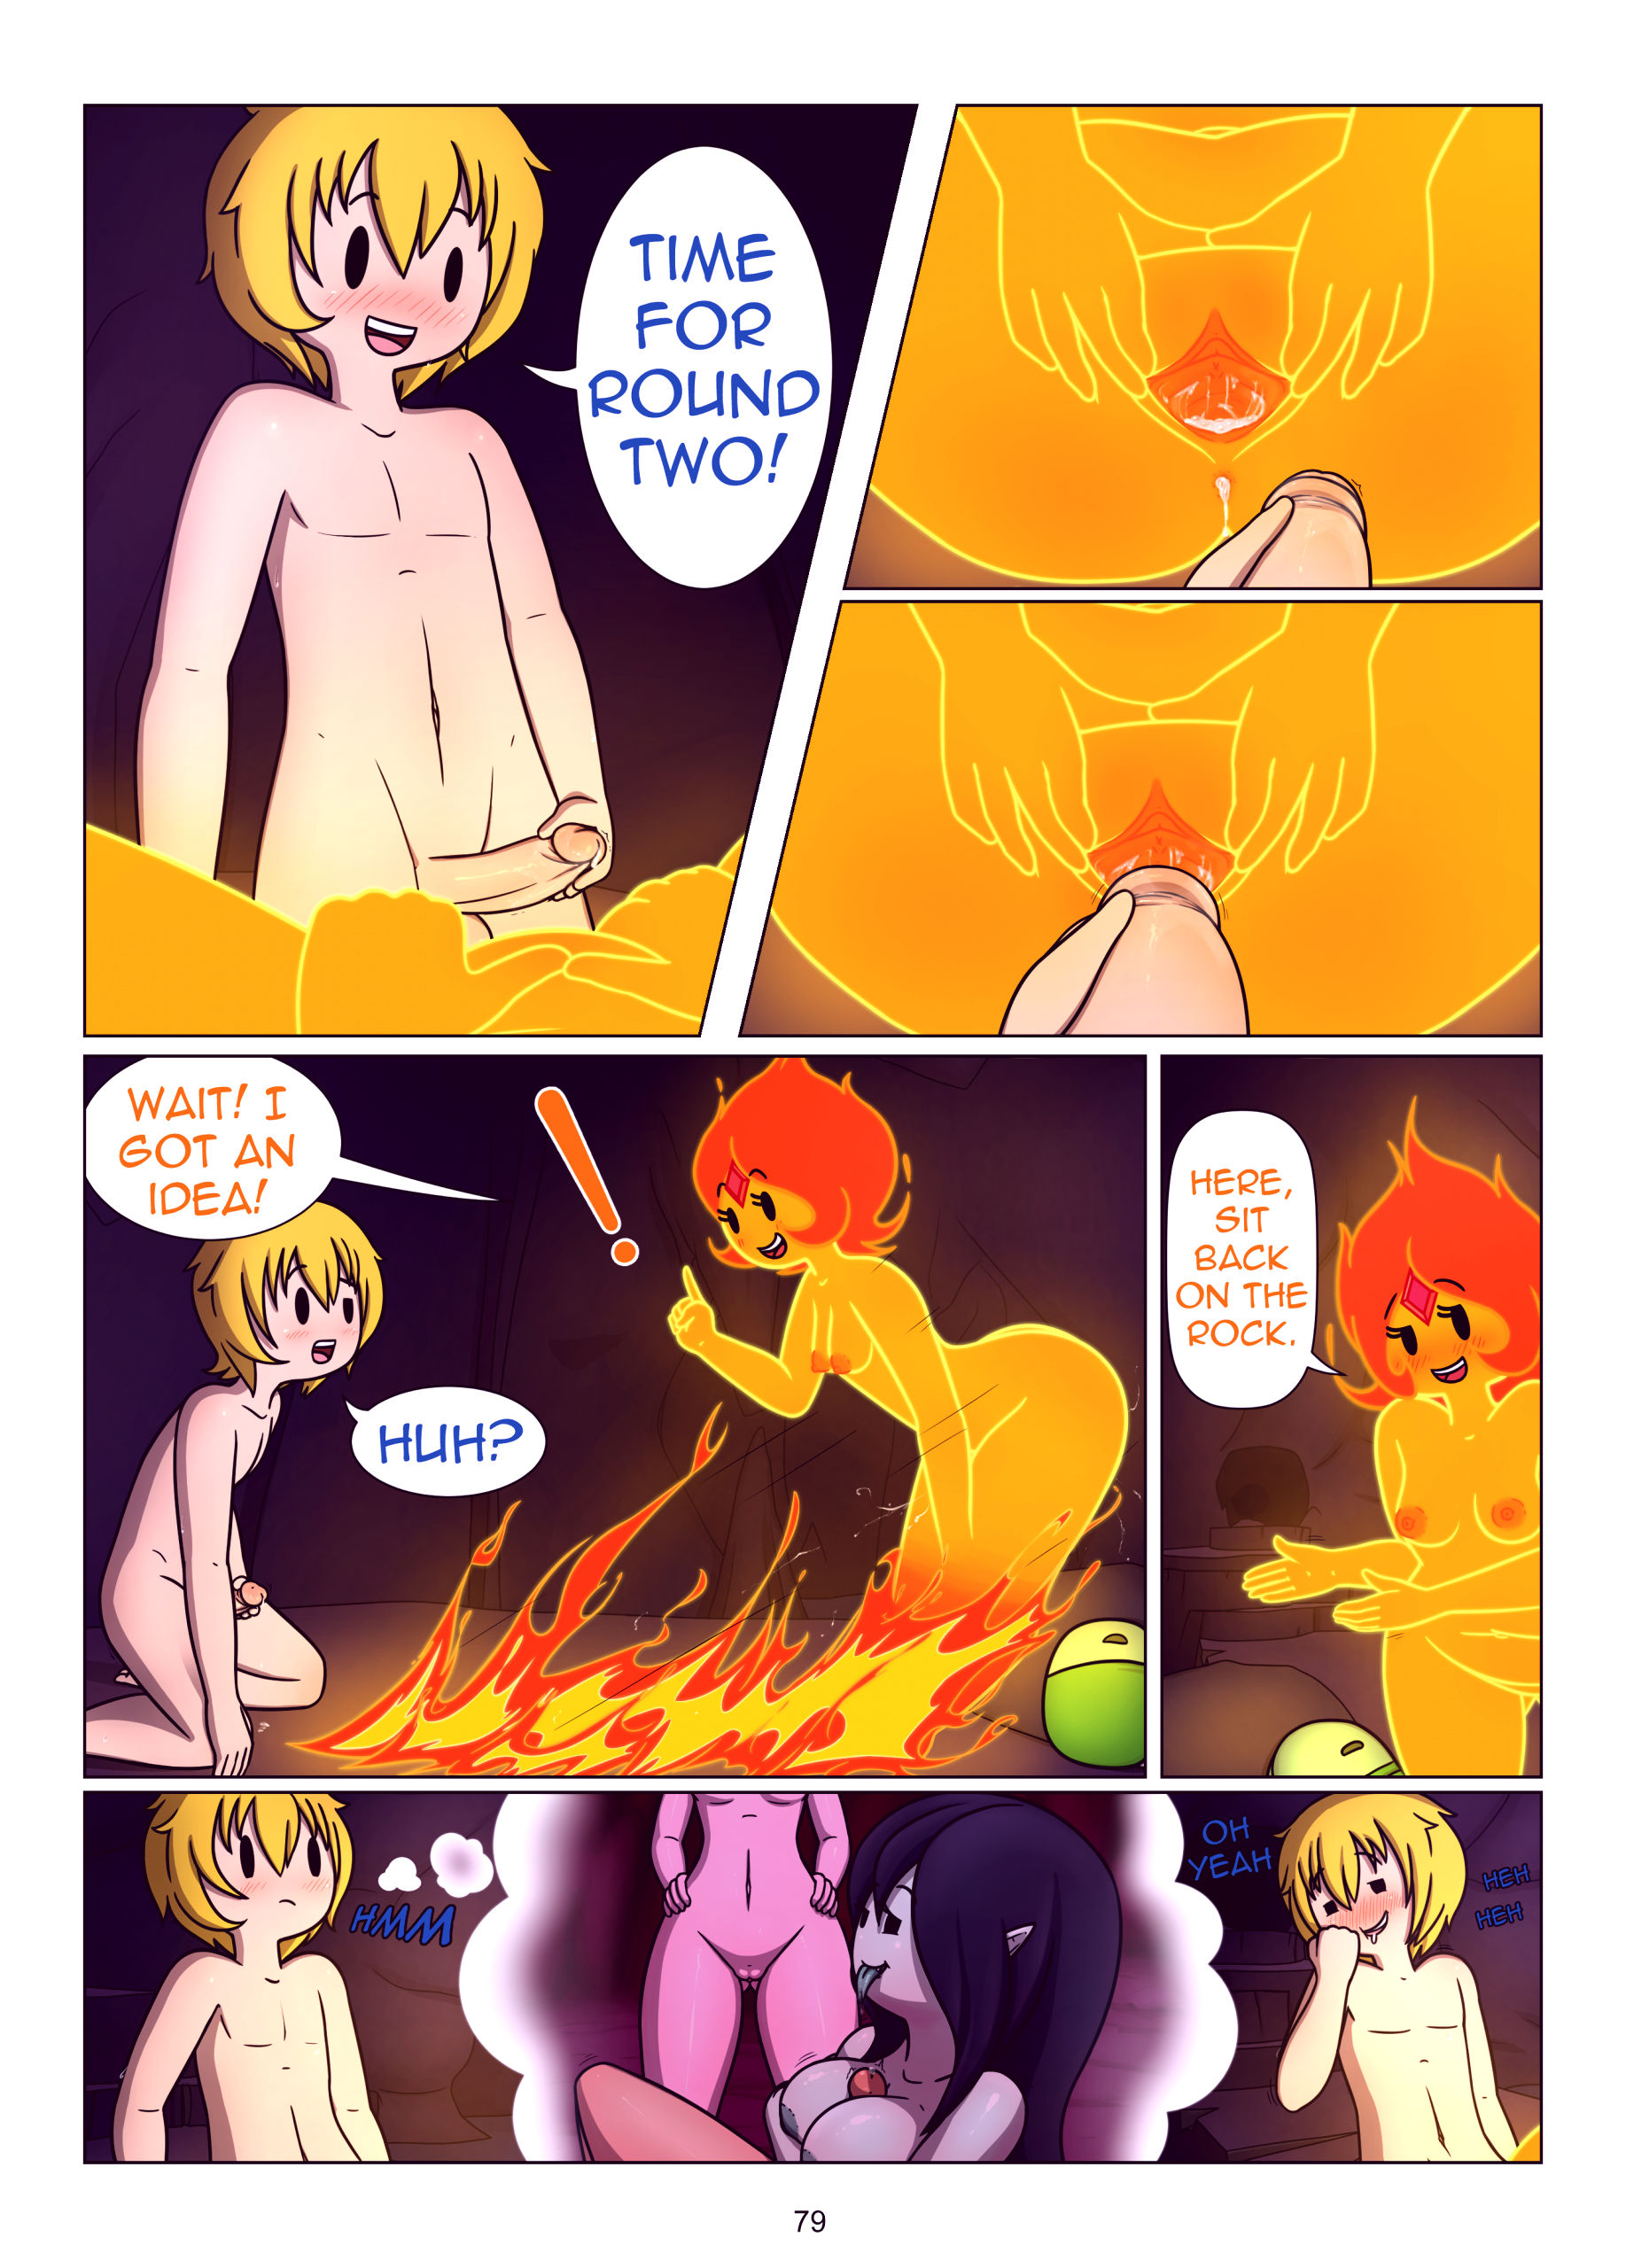 Misadventure time the collection porn comic picture 80